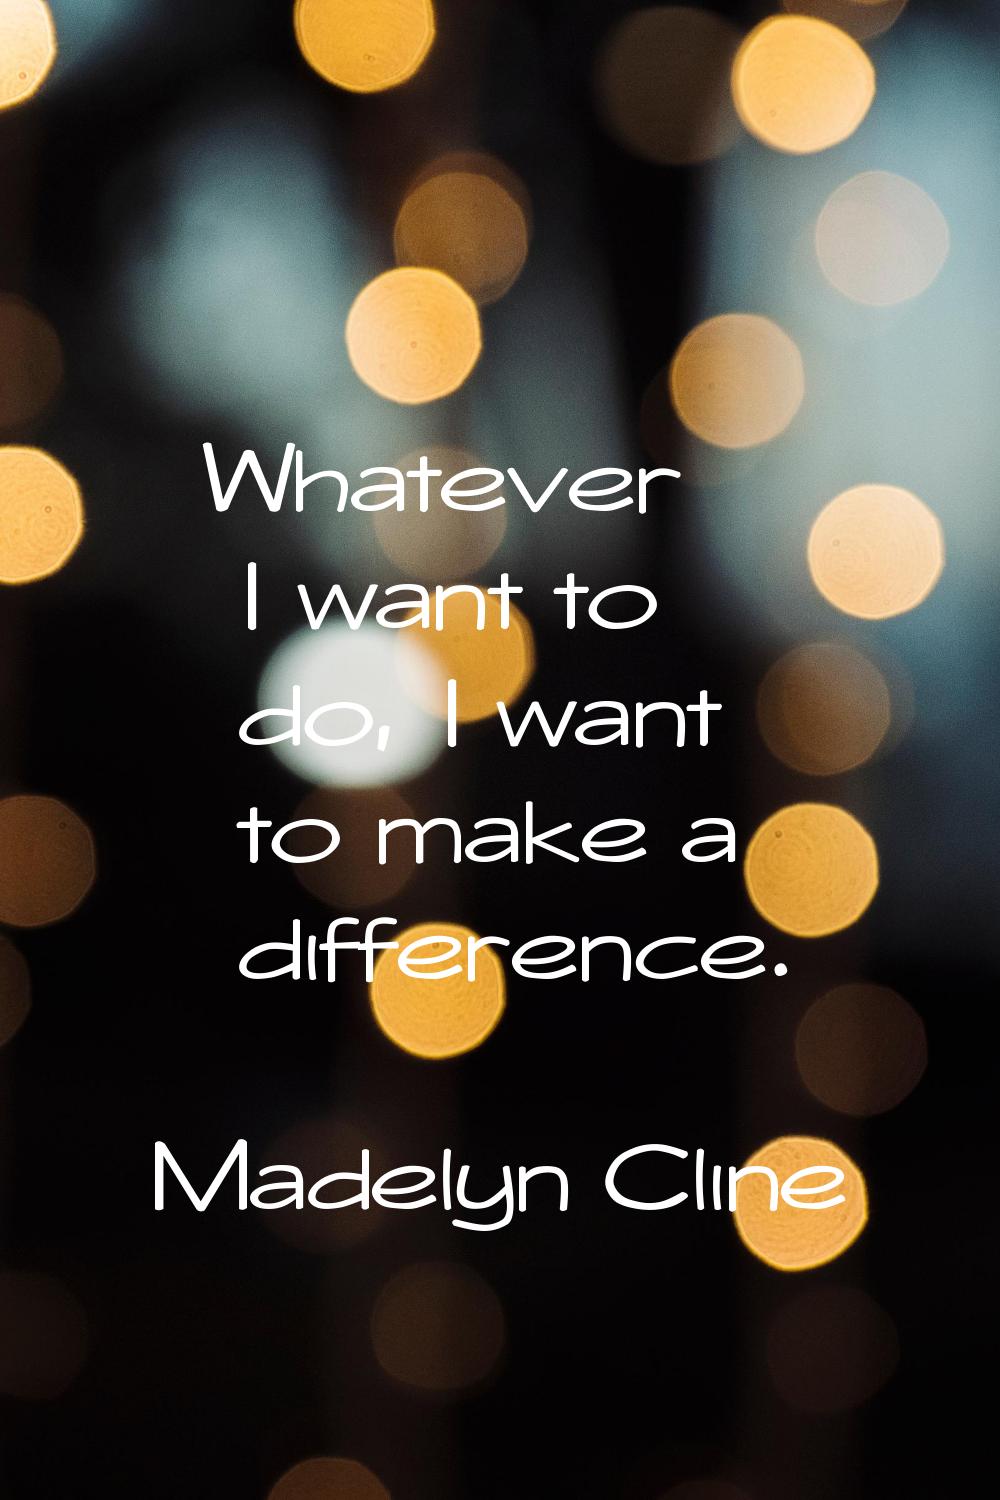 Whatever I want to do, I want to make a difference.